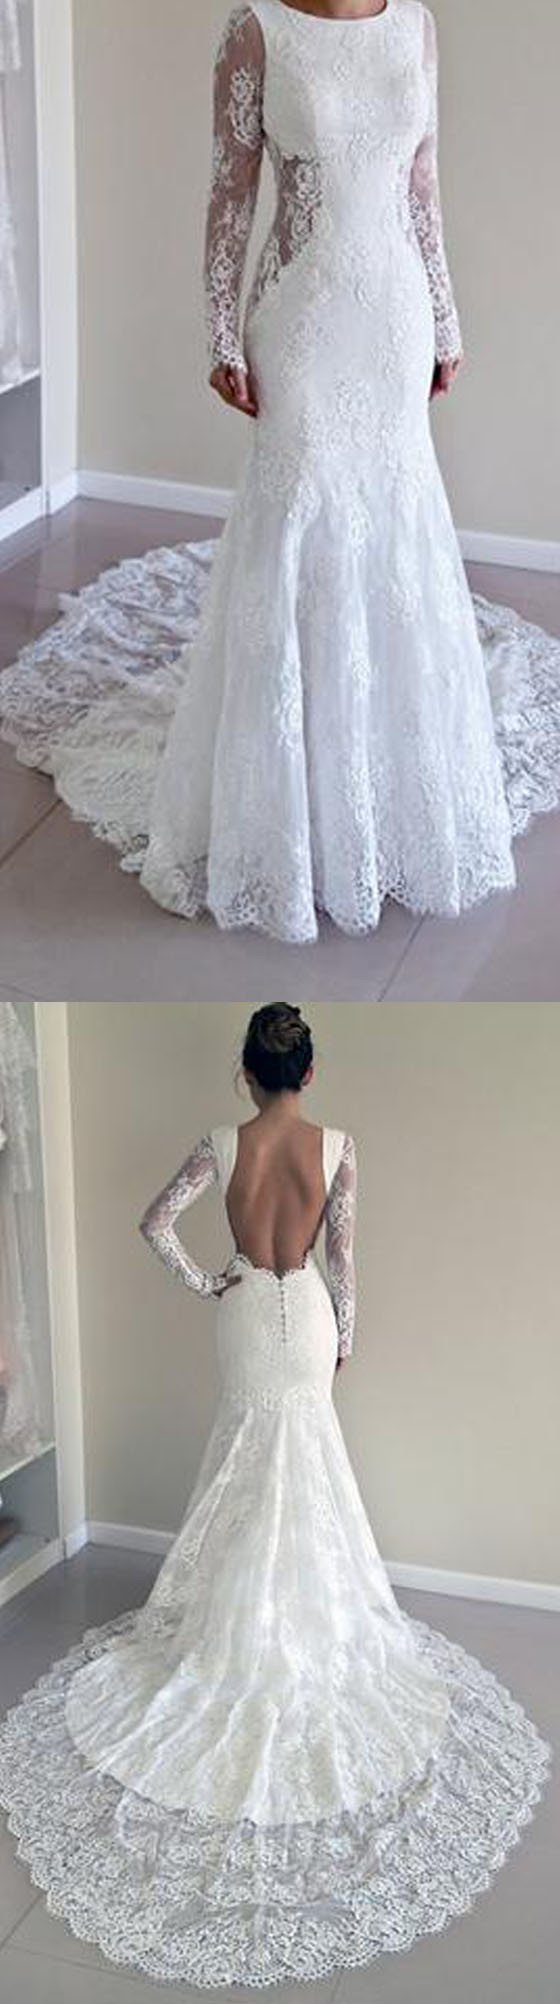 Sexy Full Sleeve Open Back Beautiful Affordable Lace Wedding Dresses w